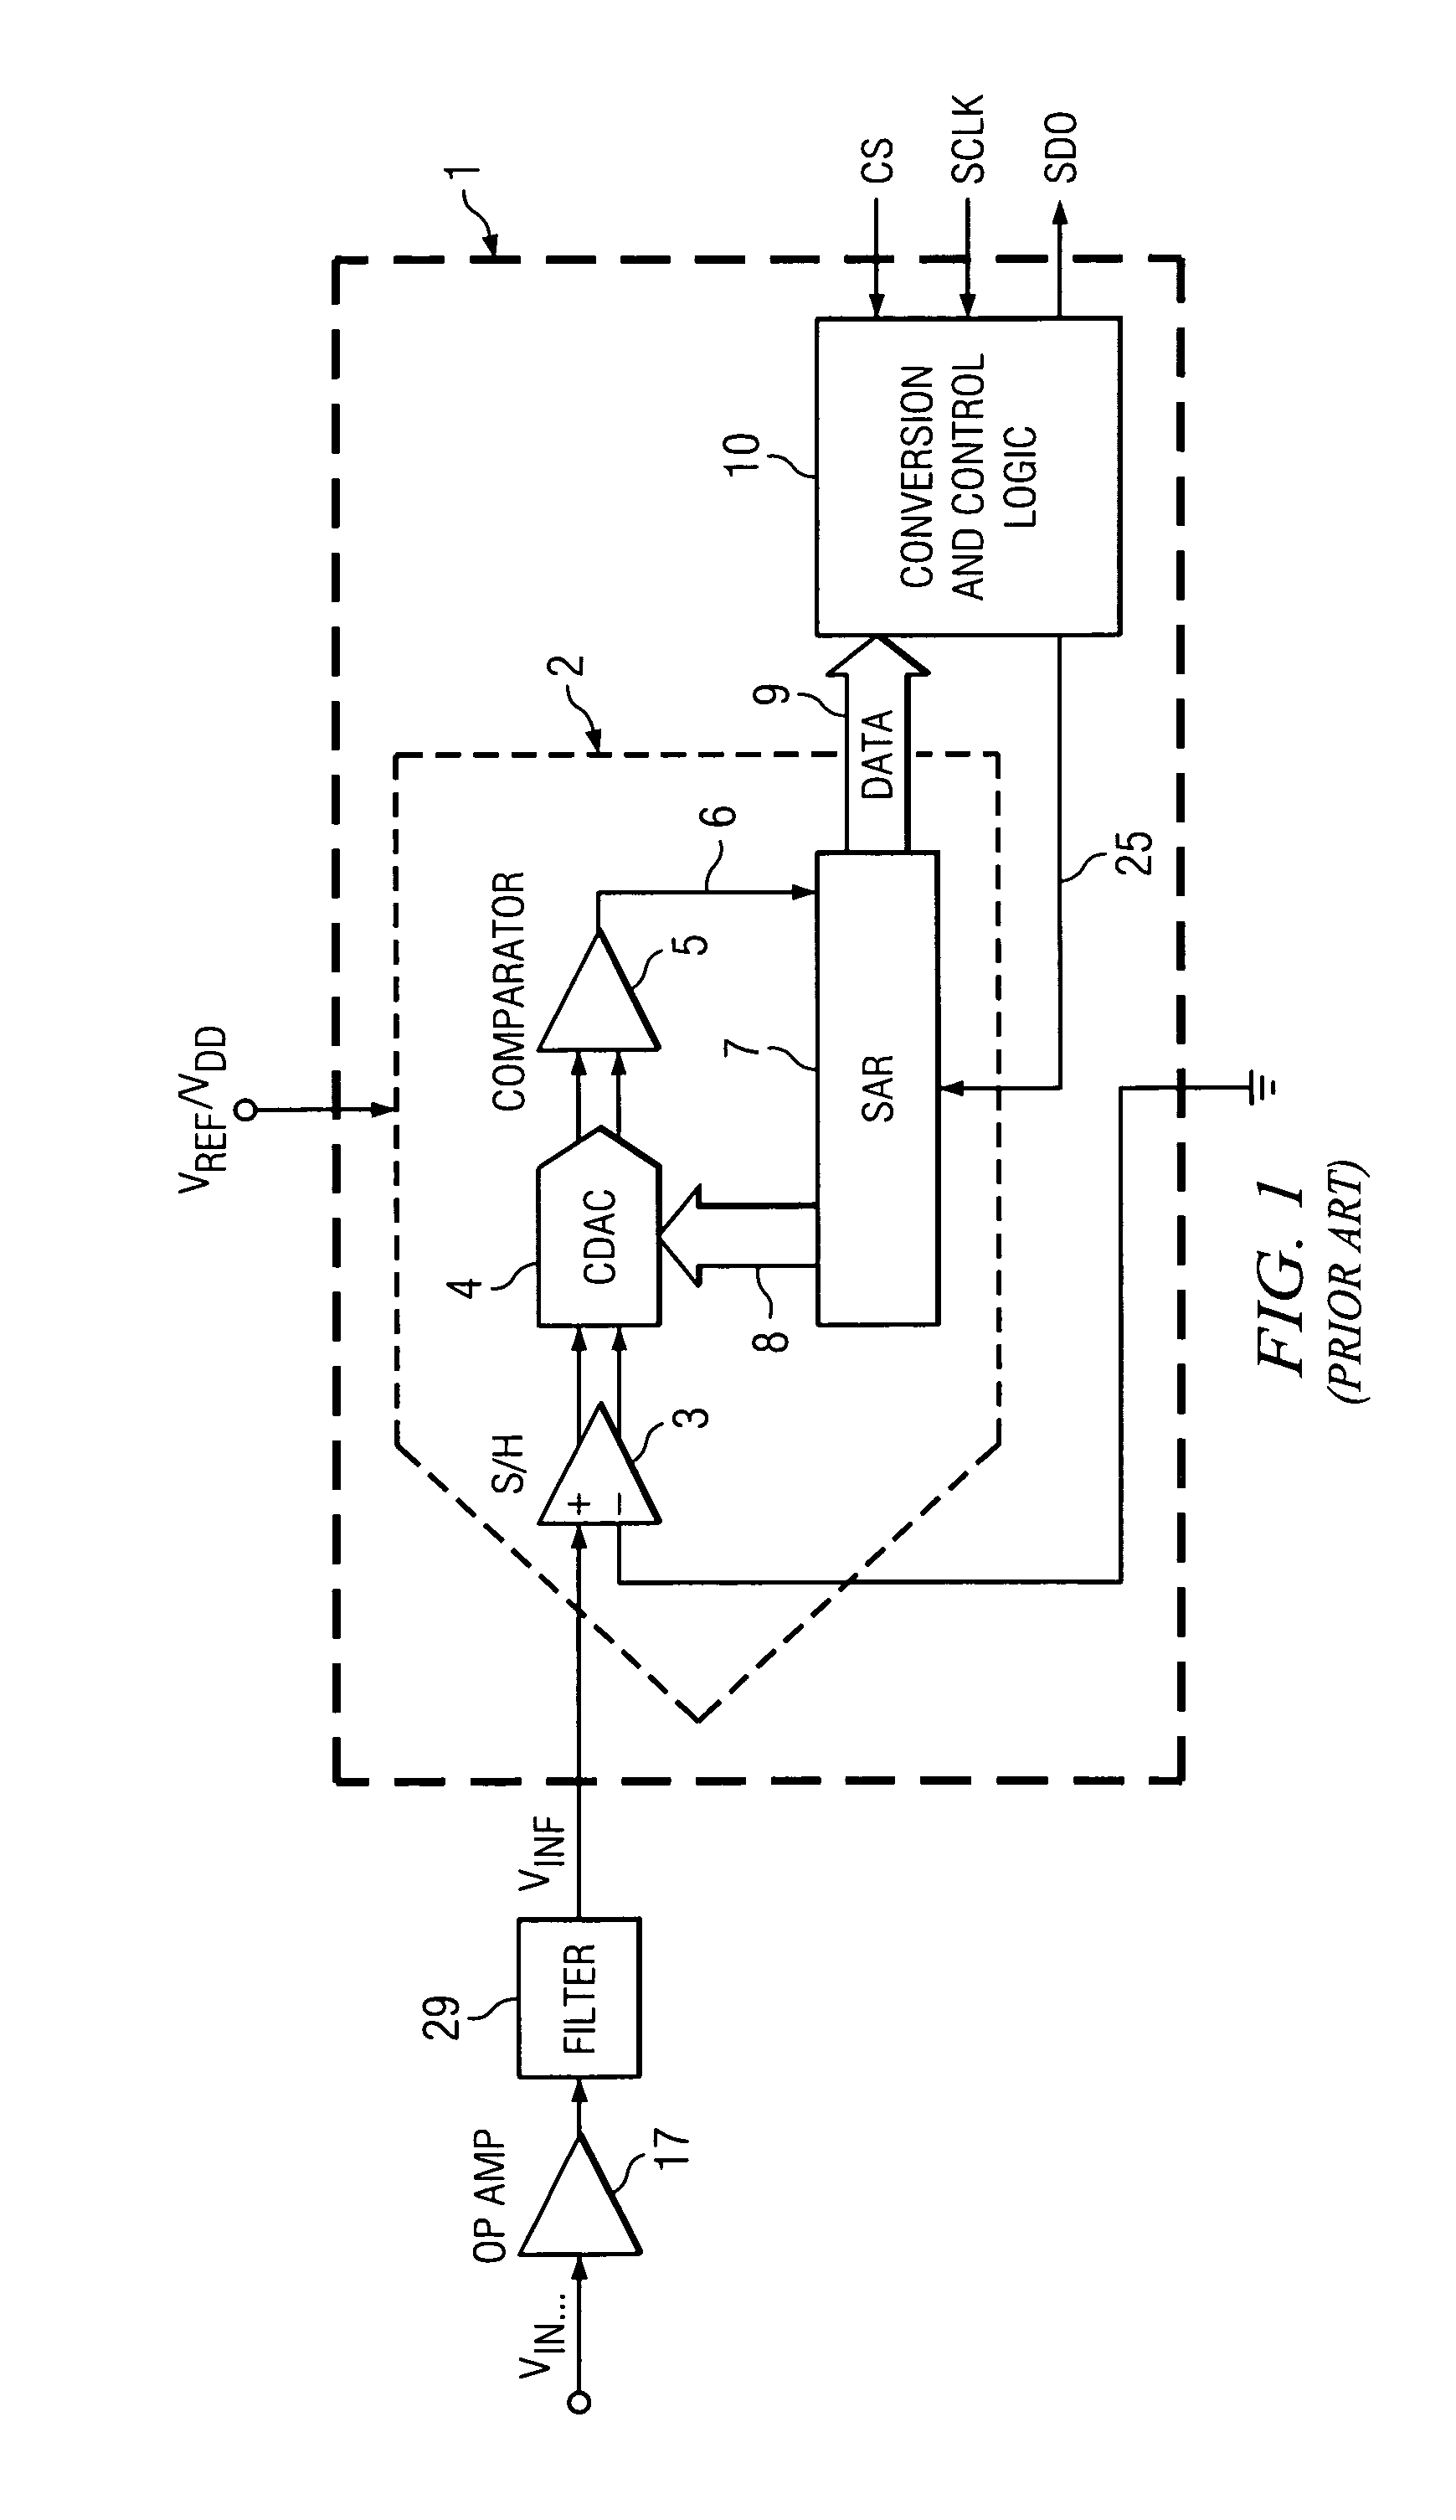 Low power, high speed multi-channel data acquisition system and method